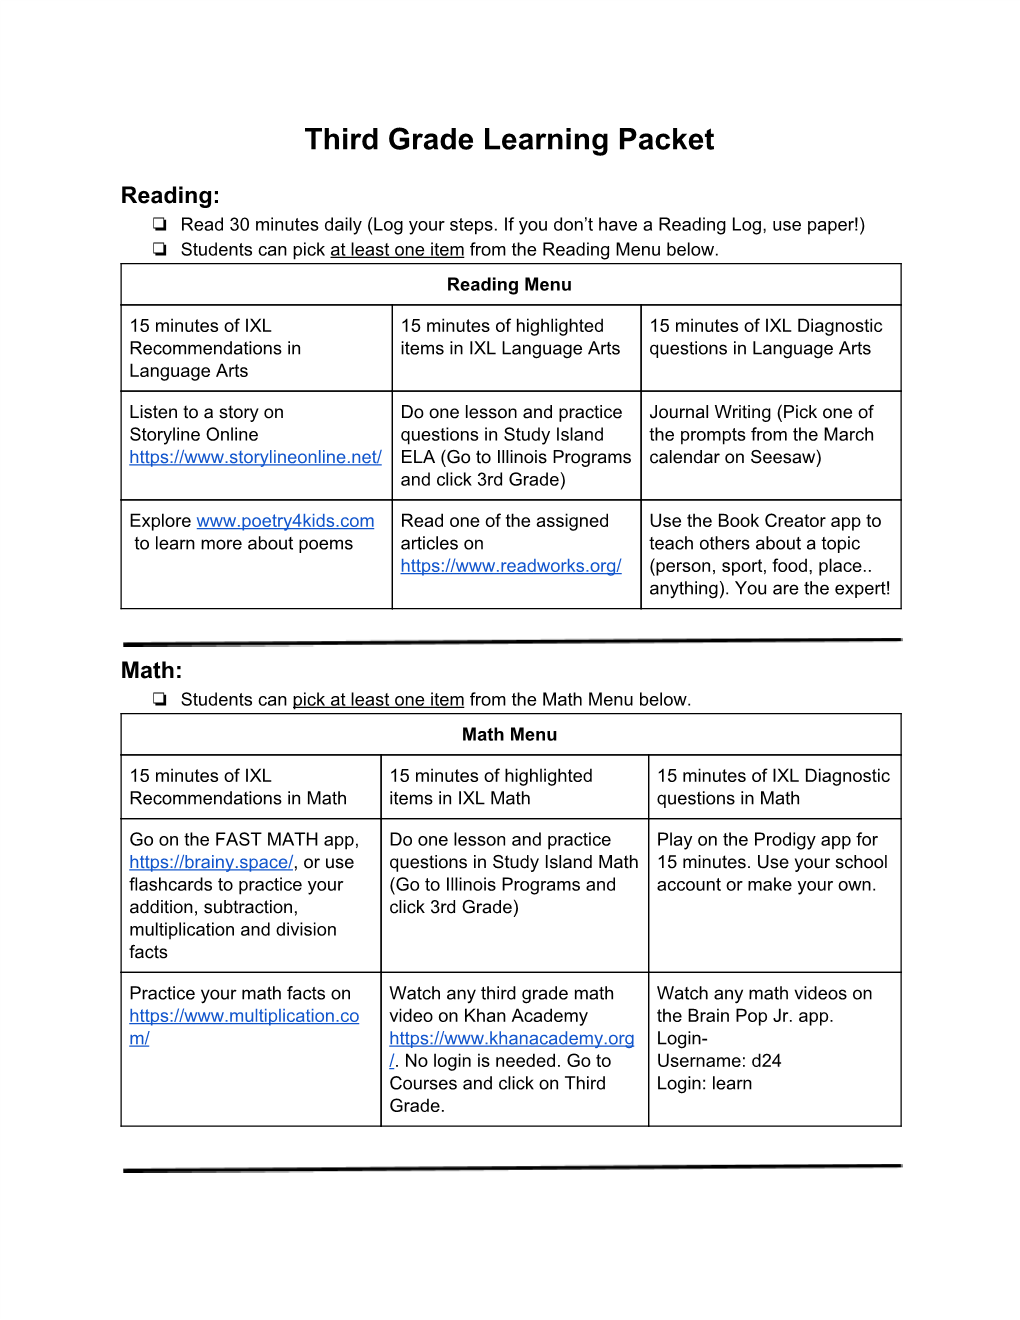 Third Grade Learning Packet